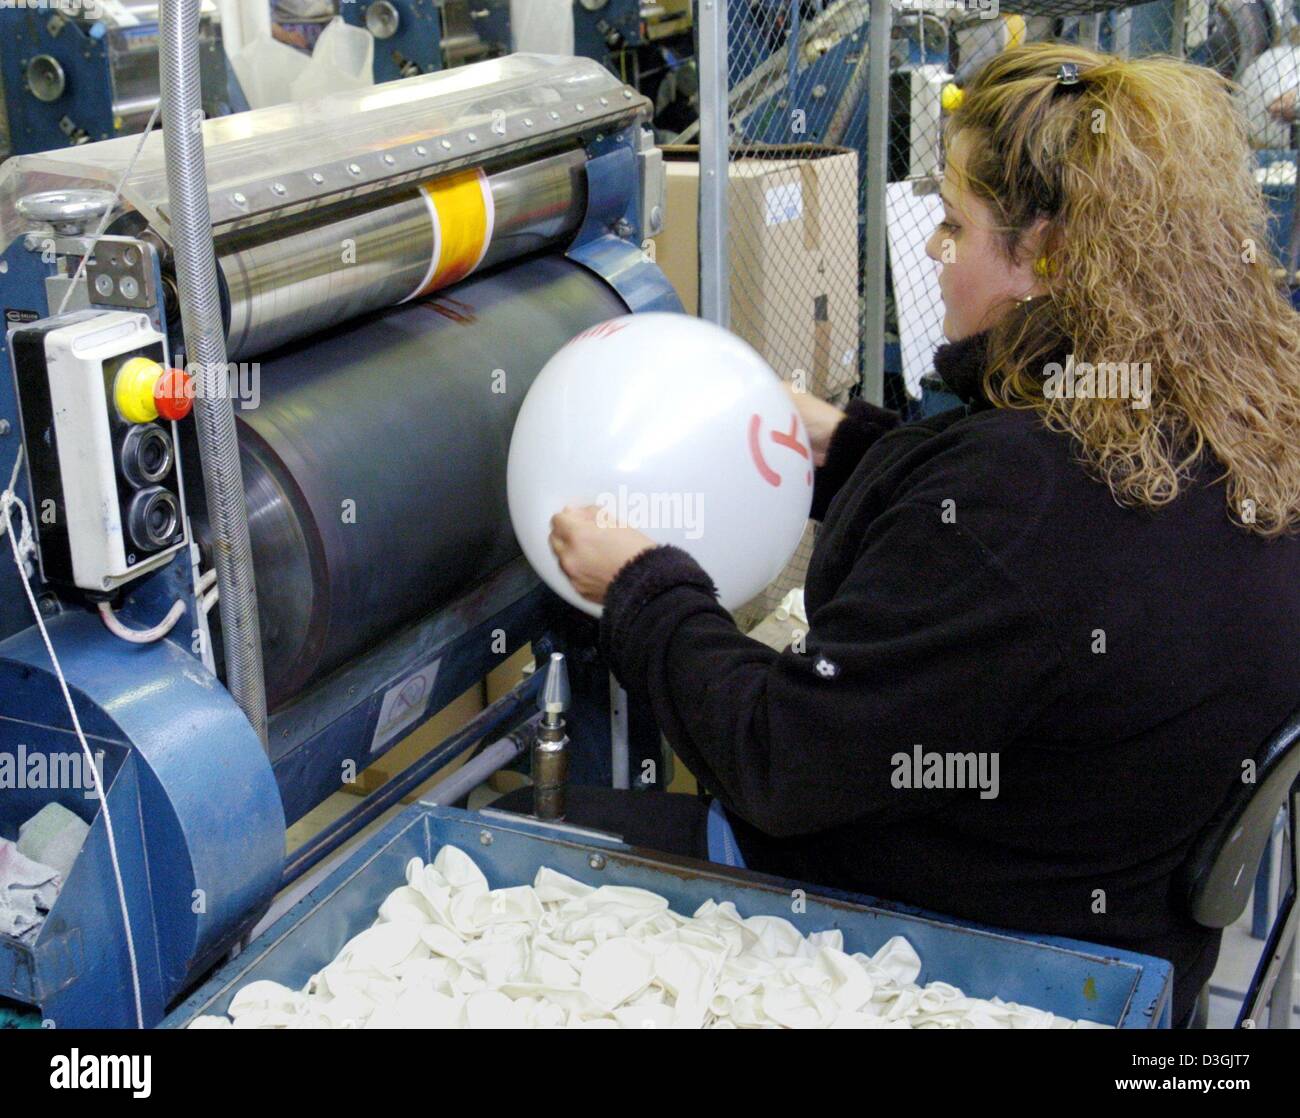 dpa) - An employee of the Everts Ballon GmbH is in the process of producing  an air balloon at one of the company's plants in Datteln, Germany, 16 July  2004. The company